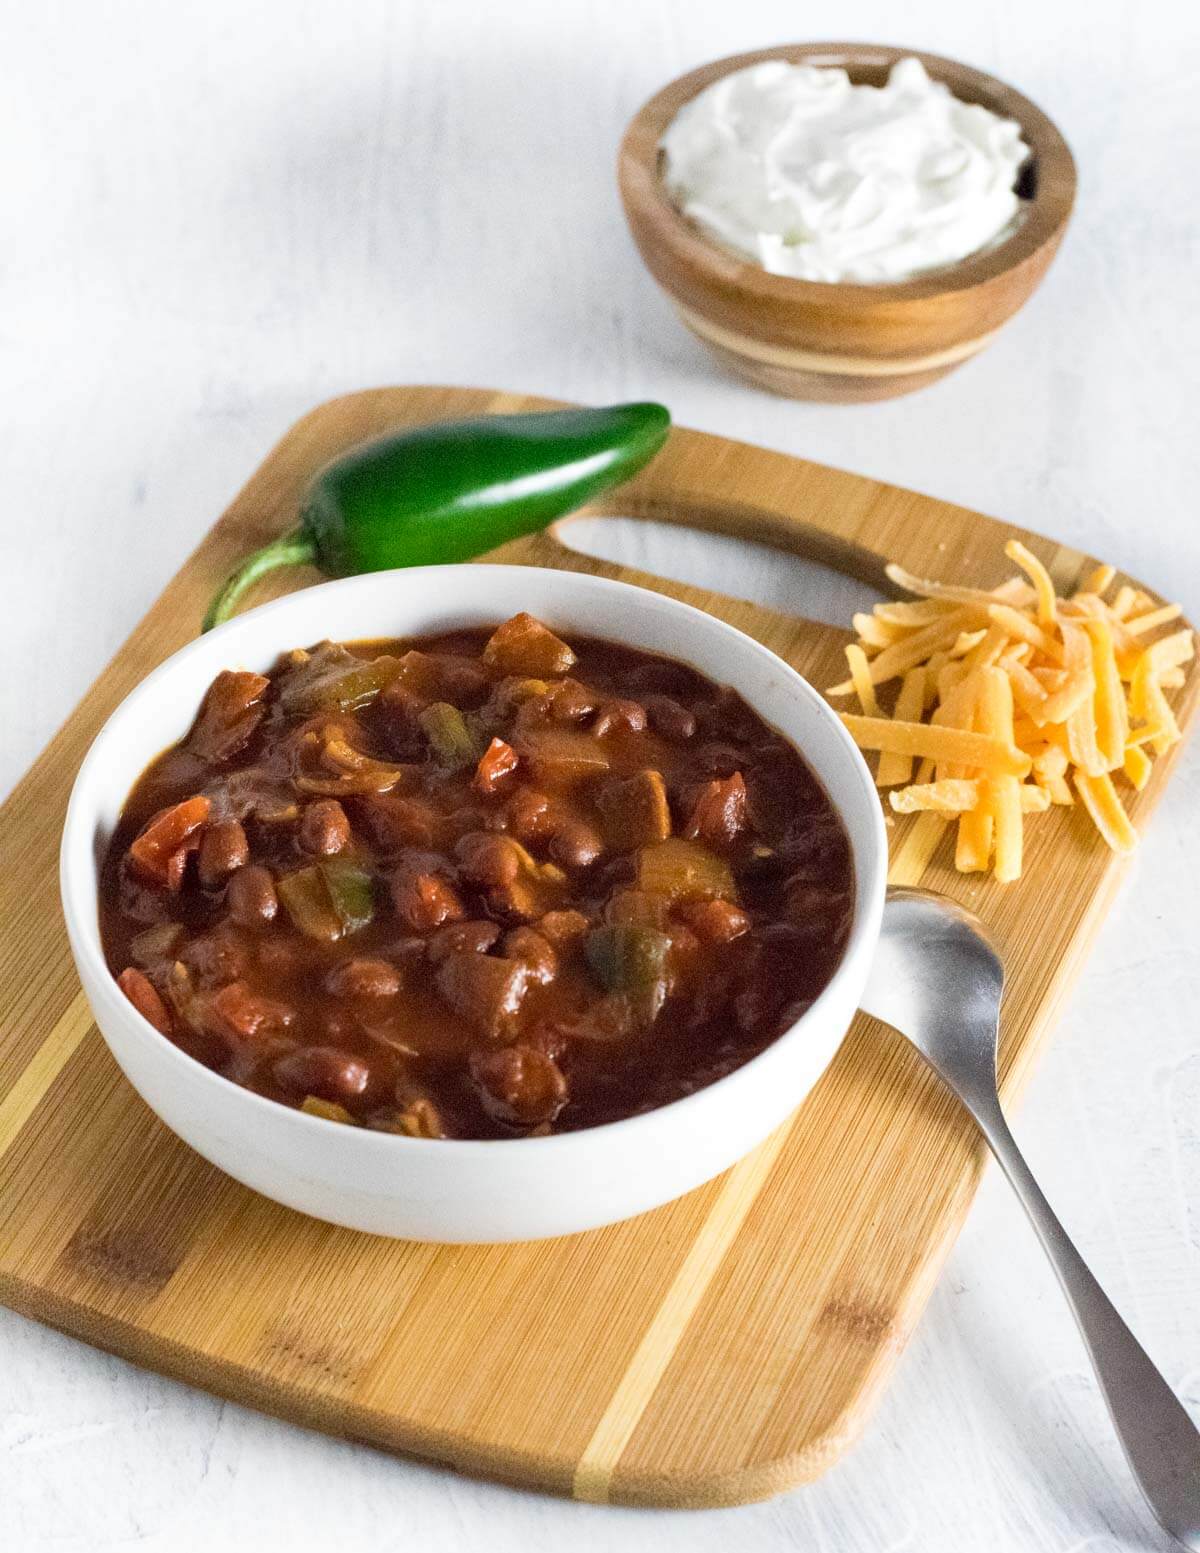 Serving BBQ brisket chili with toppings.